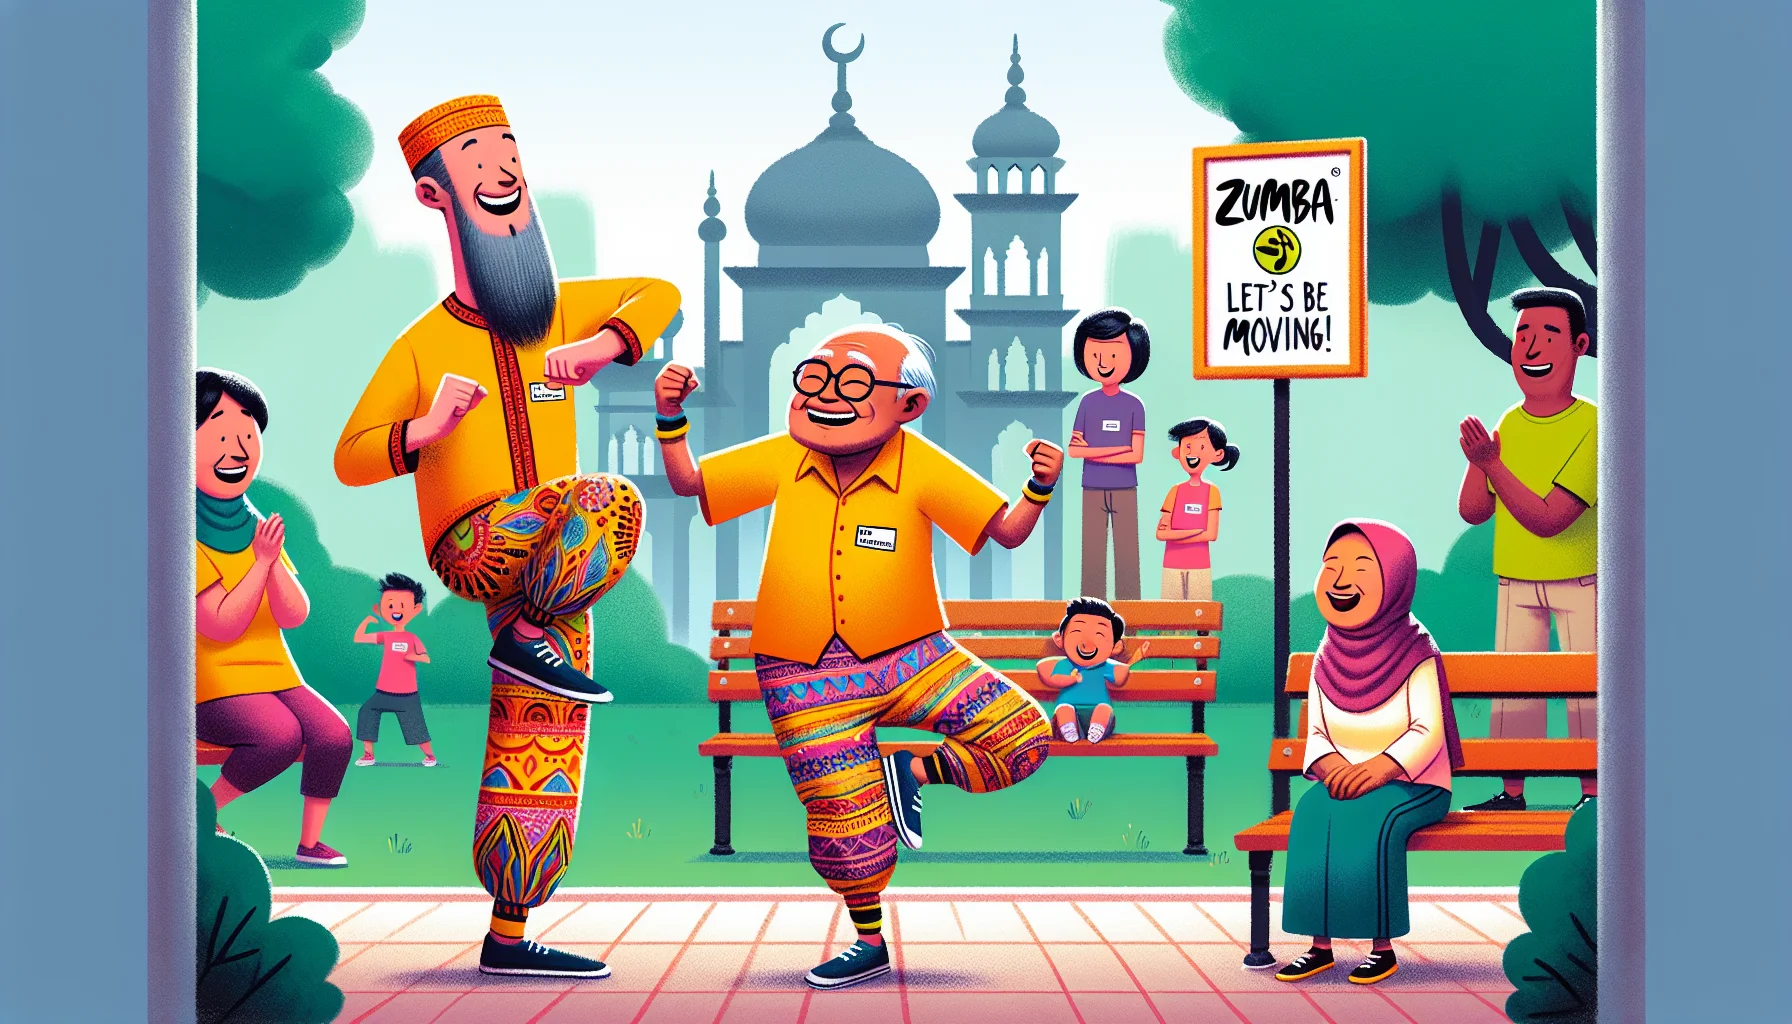 Create an image showing an amusing scenario featuring zumba pants. In this image, you see zumba pants on various characters in a park - a tall, Middle-Eastern man in his late 20s, and a short, elderly Hispanic woman. They are both engaged in hilarious attempts to do yoga poses while wearing their brightly colored zumba pants. Watching and laughing are an Asian woman on a park bench, a young South Asian boy, and a Caucasian couple - all wearing zumba t-shirts. The signboard on the park gate reads, 'Zumba Fun Day - Let's Get Moving!'. This image should be filled with bright colors, laughter, and a fun, welcoming atmosphere that encourages exercise.